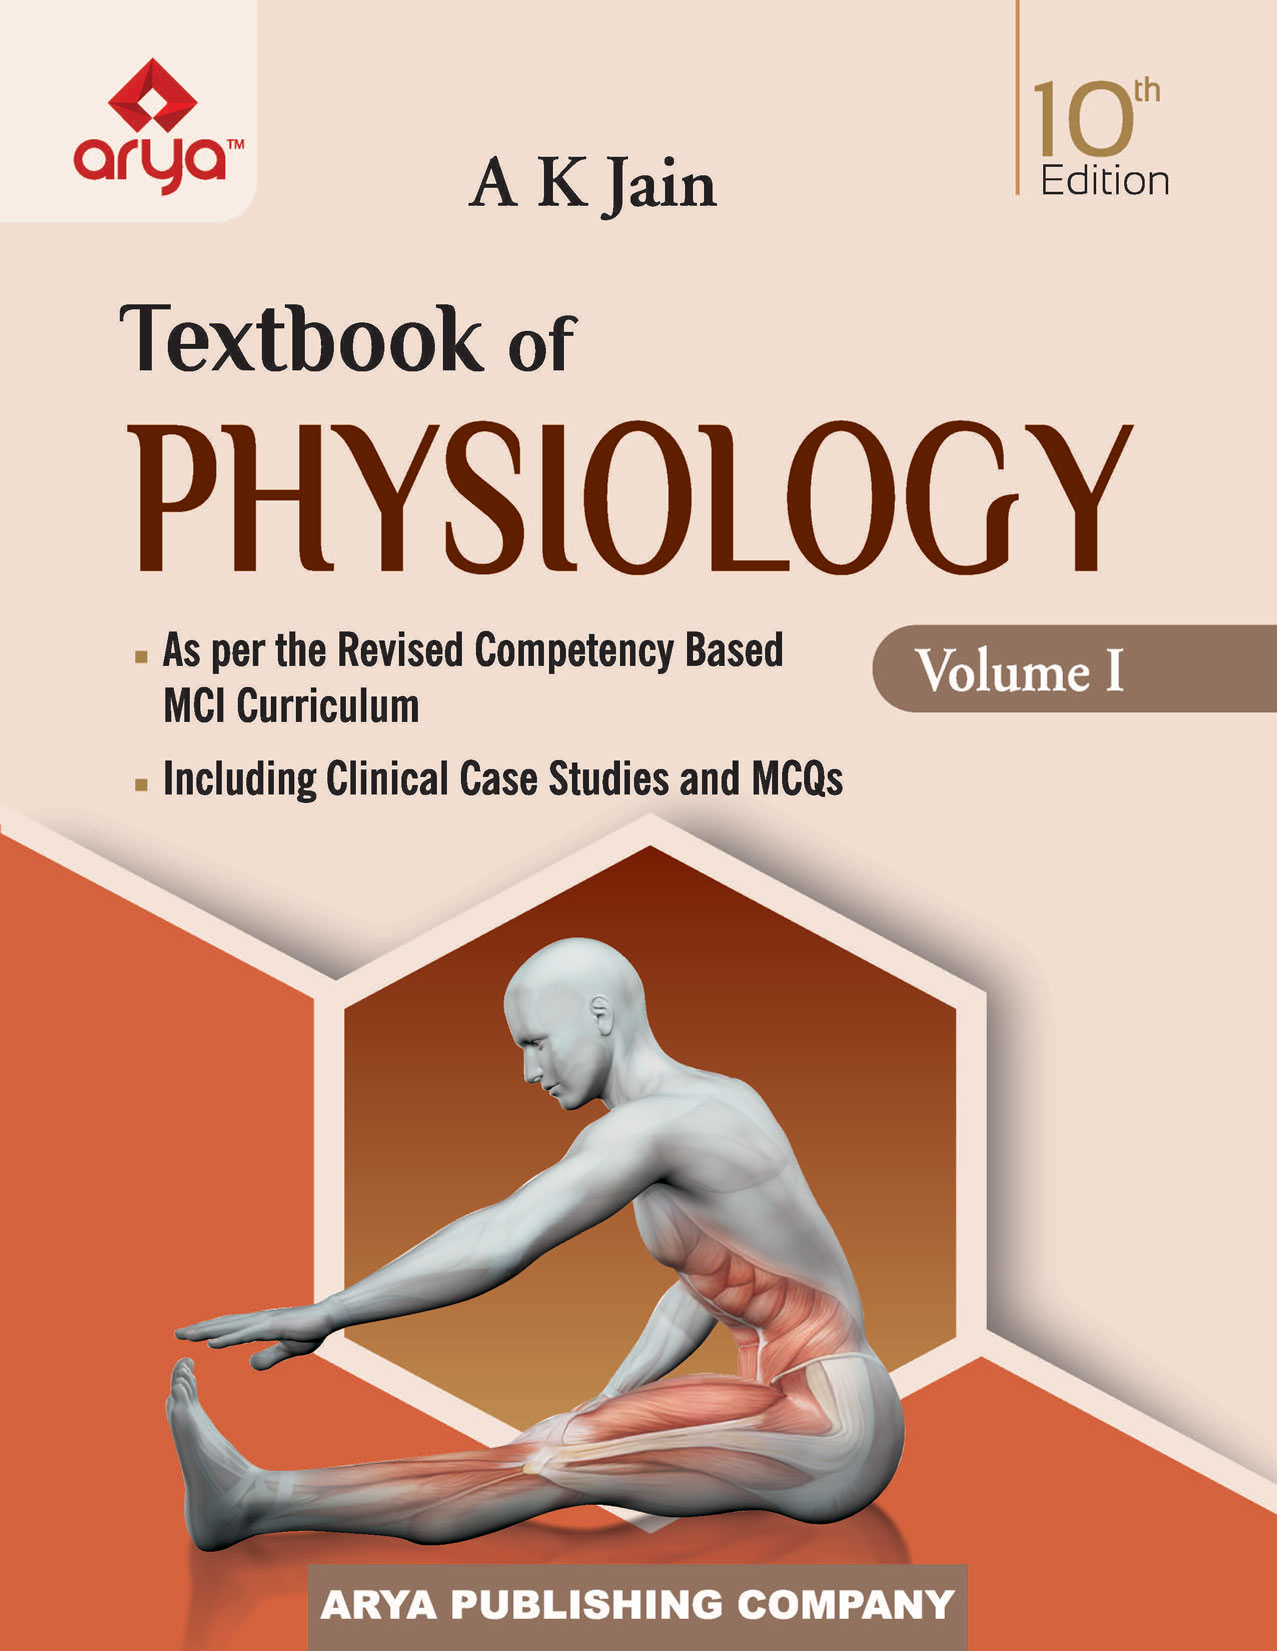 Textbook of Physiology (Volumes I and II)